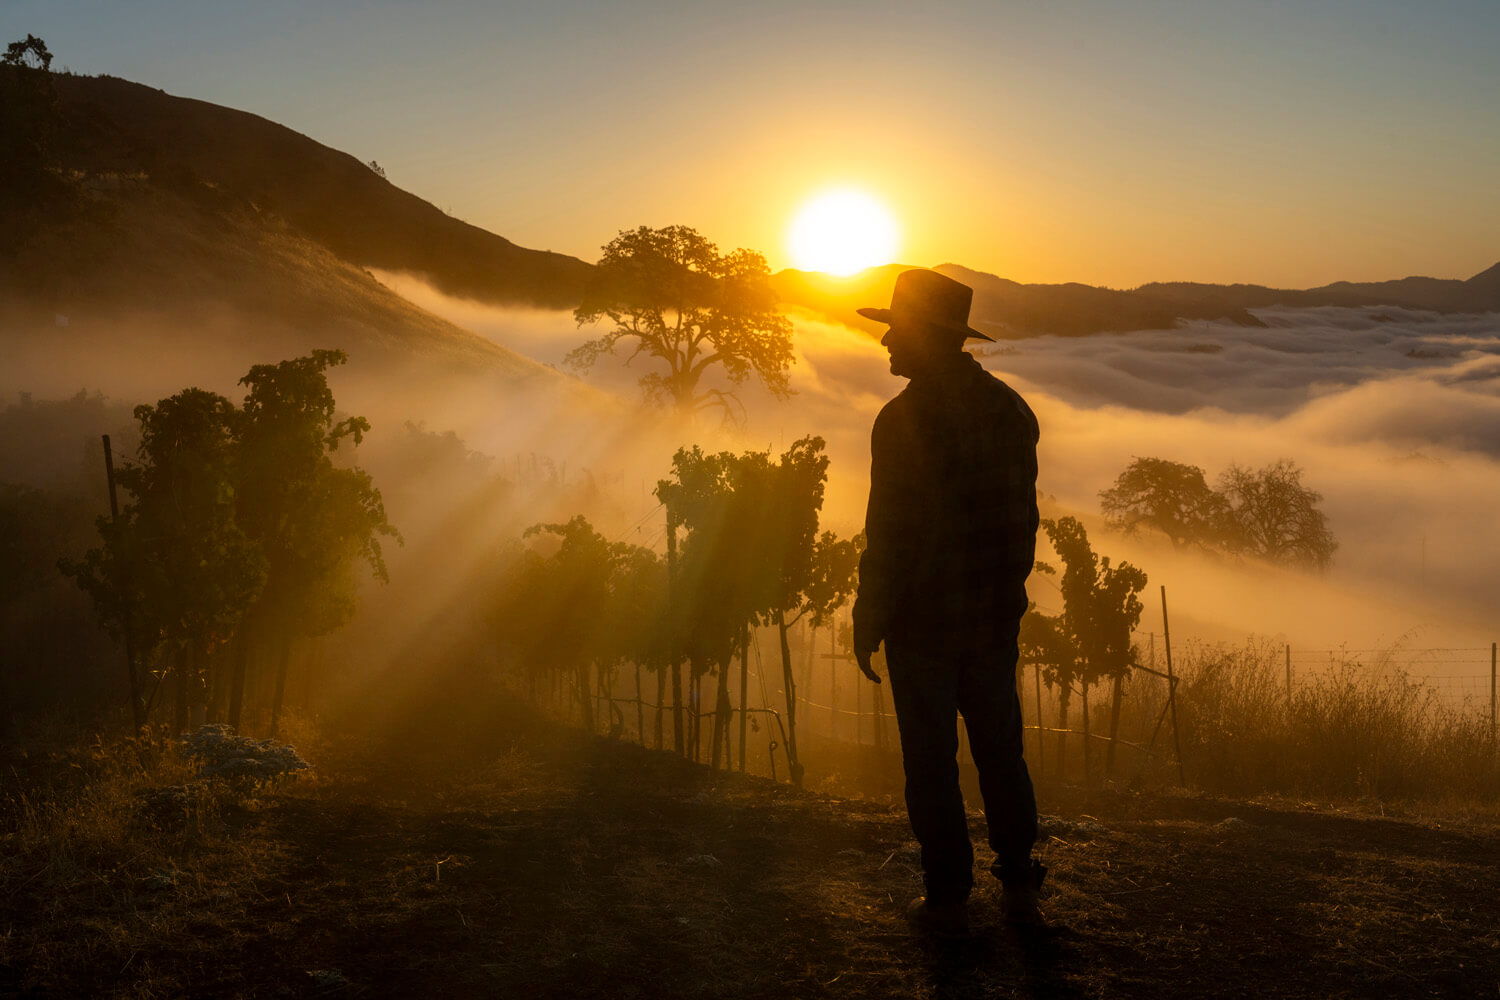 A silhouette of a person wearing a hat stands on a hillside at sunrise, with the sun casting a warm glow and mist in the valleys below. The person appears contemplative, gazing into the middle distance as the early morning light breaks through the low clouds, highlighting the undulating landscape.